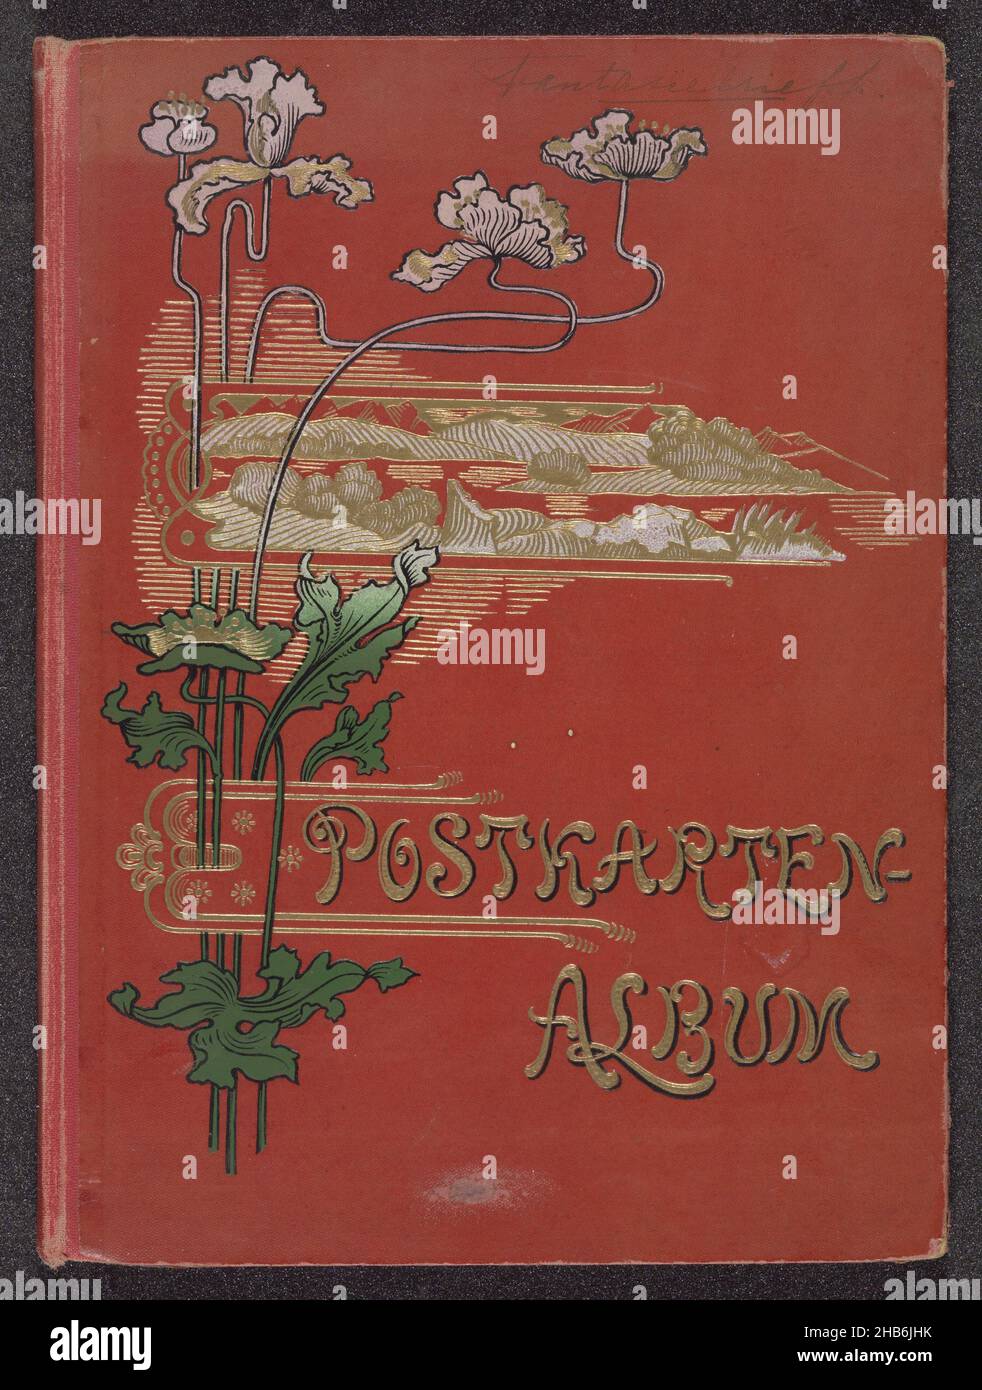 Picture postcard album (empty), Postkarten album (title on object), Picture postcard album in red binding. On the front cover the title in gold print and a stylized flower with a mountain landscape in the clouds, in gold, green and pink. On the front flyleaf an image of a ship and a lighthouse, with a vase of flowers at the side. On the back flyleaf a numbered list with columns for notes. The album contains 14 sheets with room for 52 postcards., maker: anonymous, veuve Hesselvelt van Diermen (mentioned on object), The Hague, c. 1900 - c. 1930, cardboard, linen (material), painting, height 275 Stock Photo